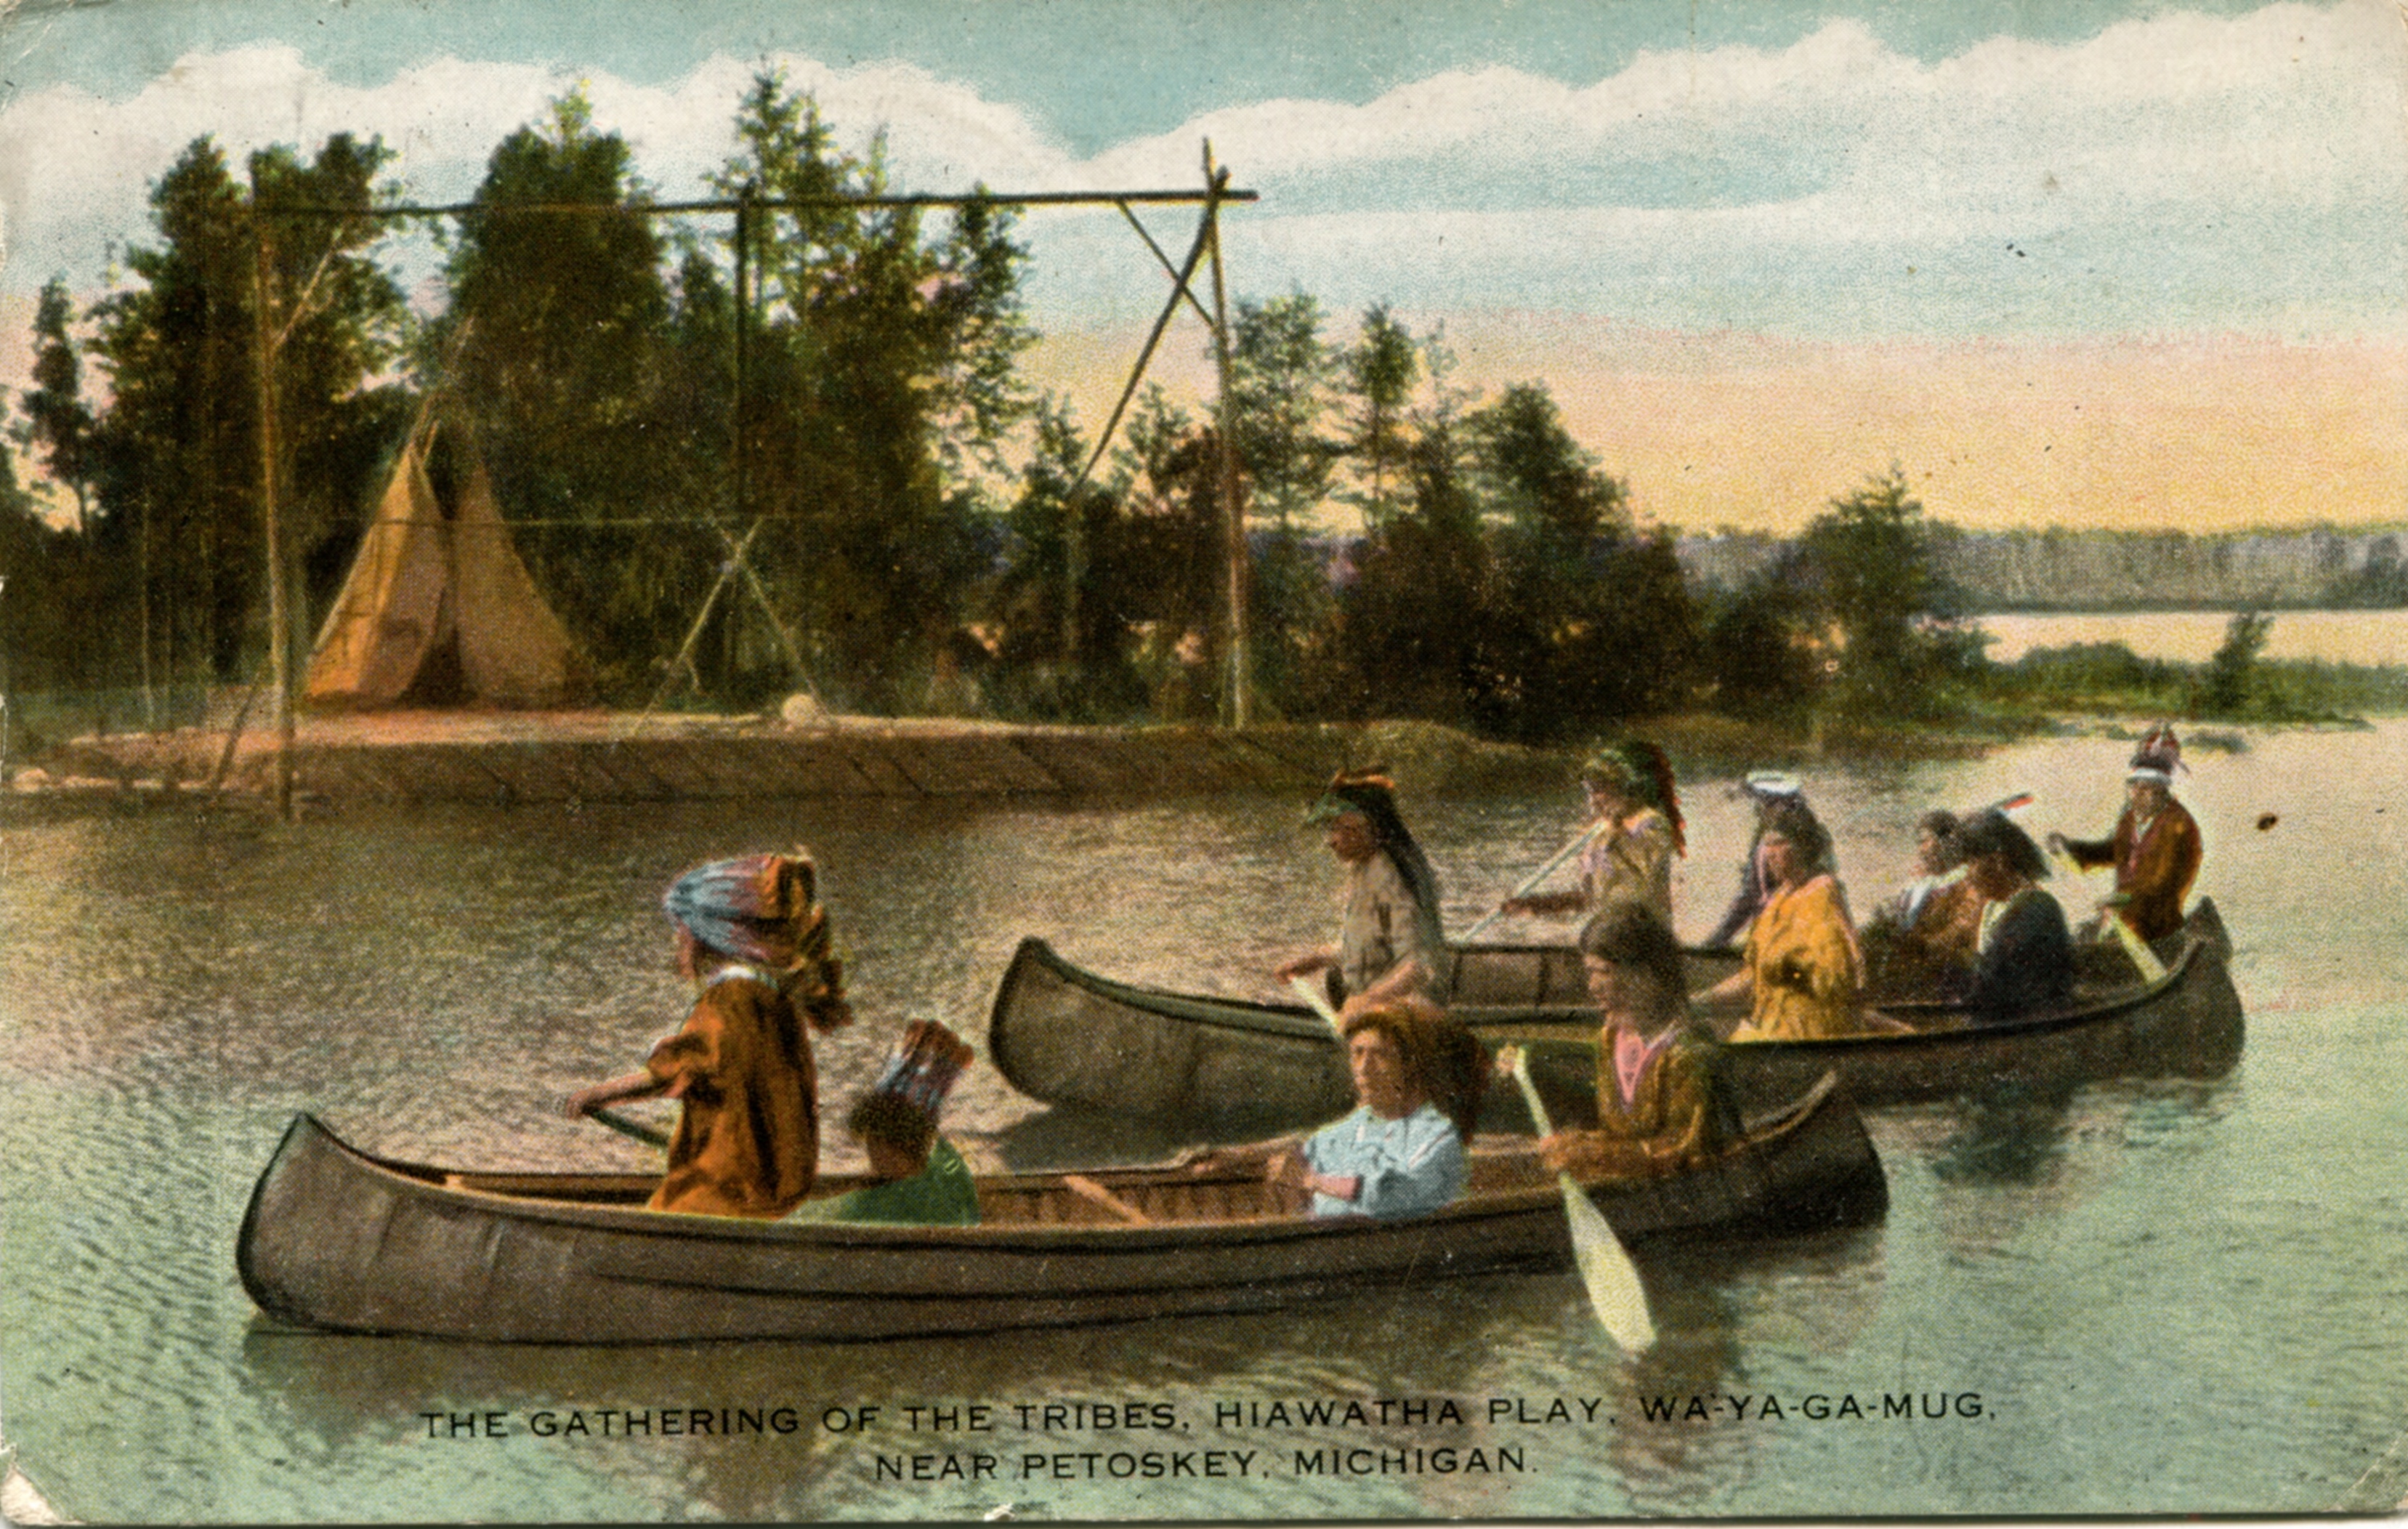 A full-color vintage postcard. Souvenir from the Hiawatha Play performed near Hemingway's family's summer cabin.  The image shows "the gathering of the tribes" arriving by canoe.